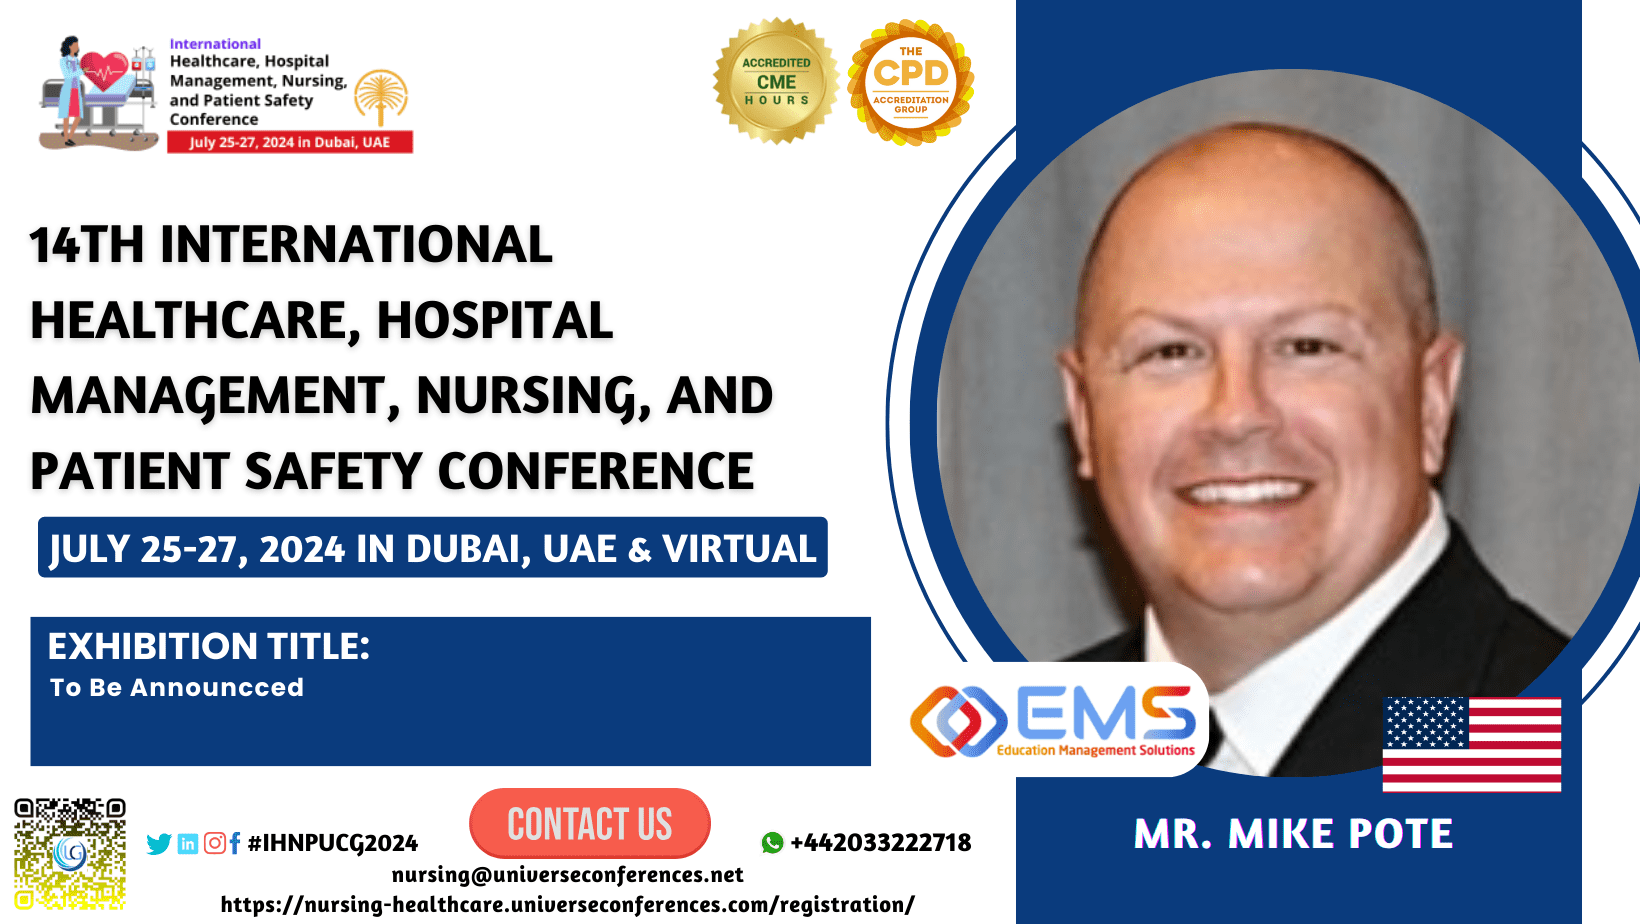 Mr. Mike Pote_14th International Healthcare, Hospital Management, Nursing, and Patient Safety Conference